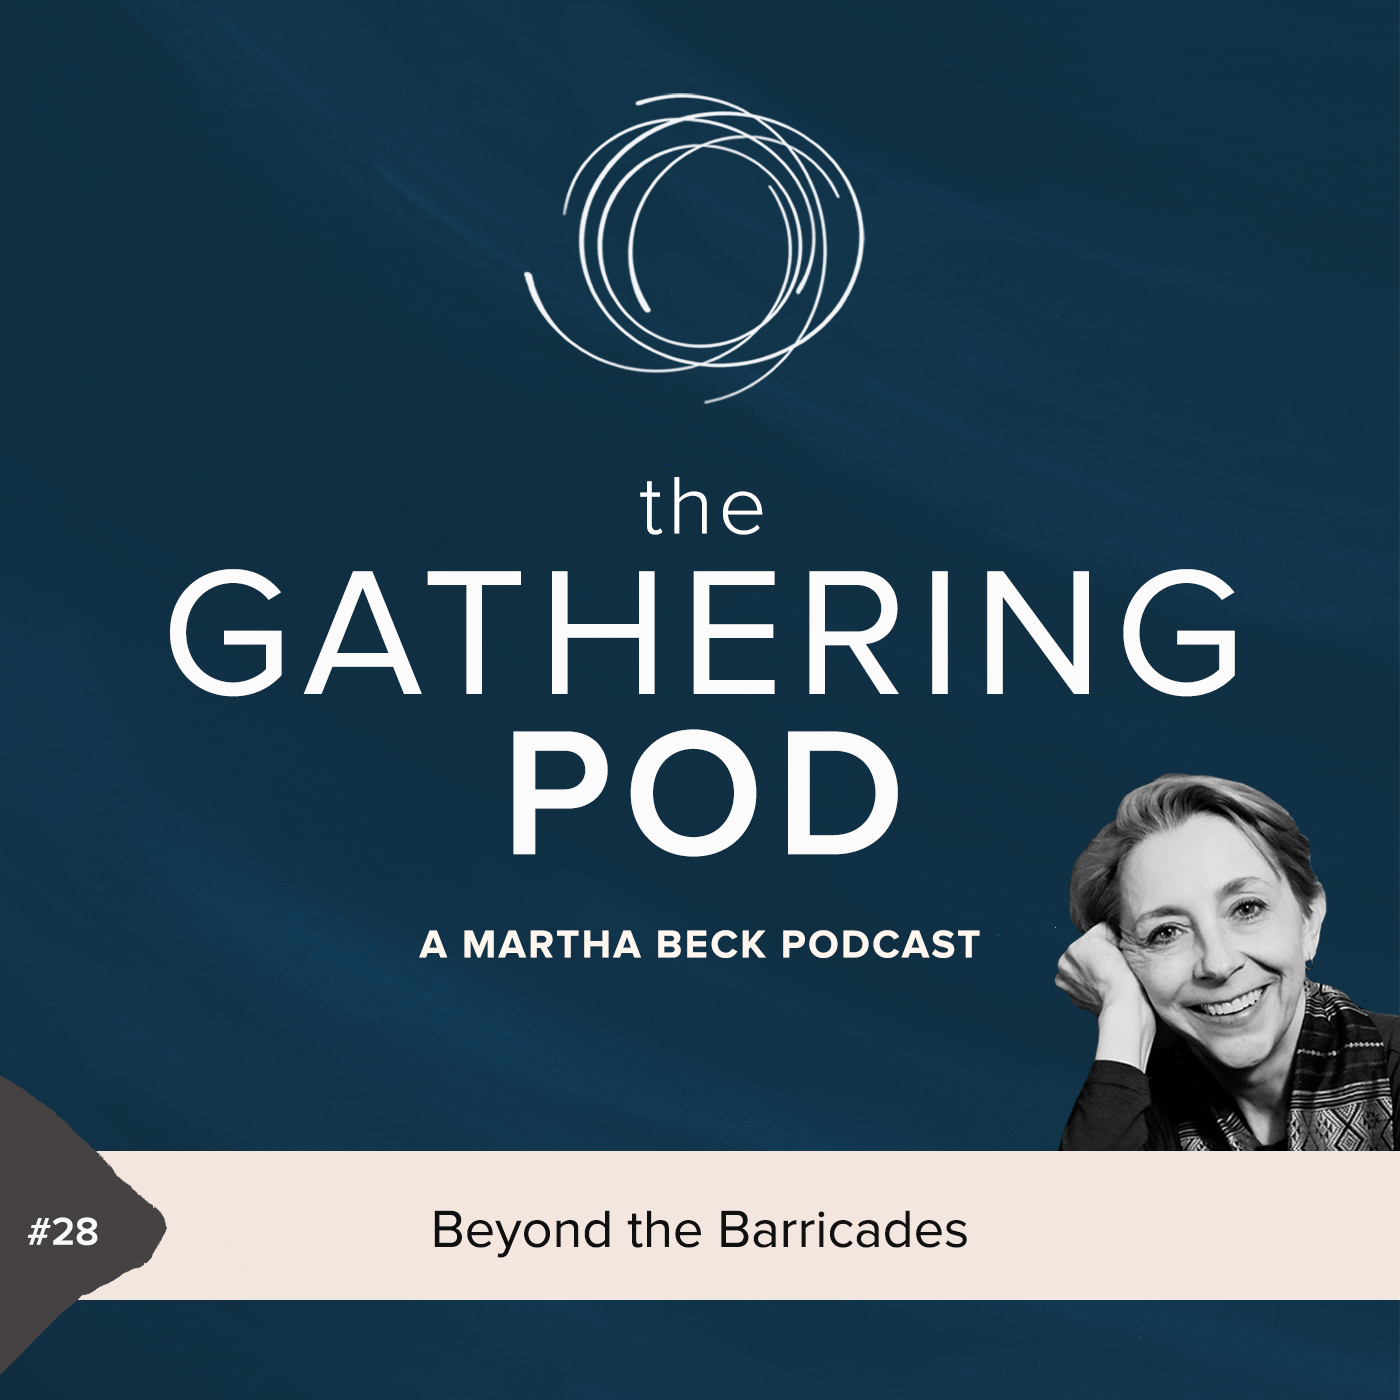 Image for The Gathering Pod A Martha Beck Podcast Episode #28 Beyond the Barricades